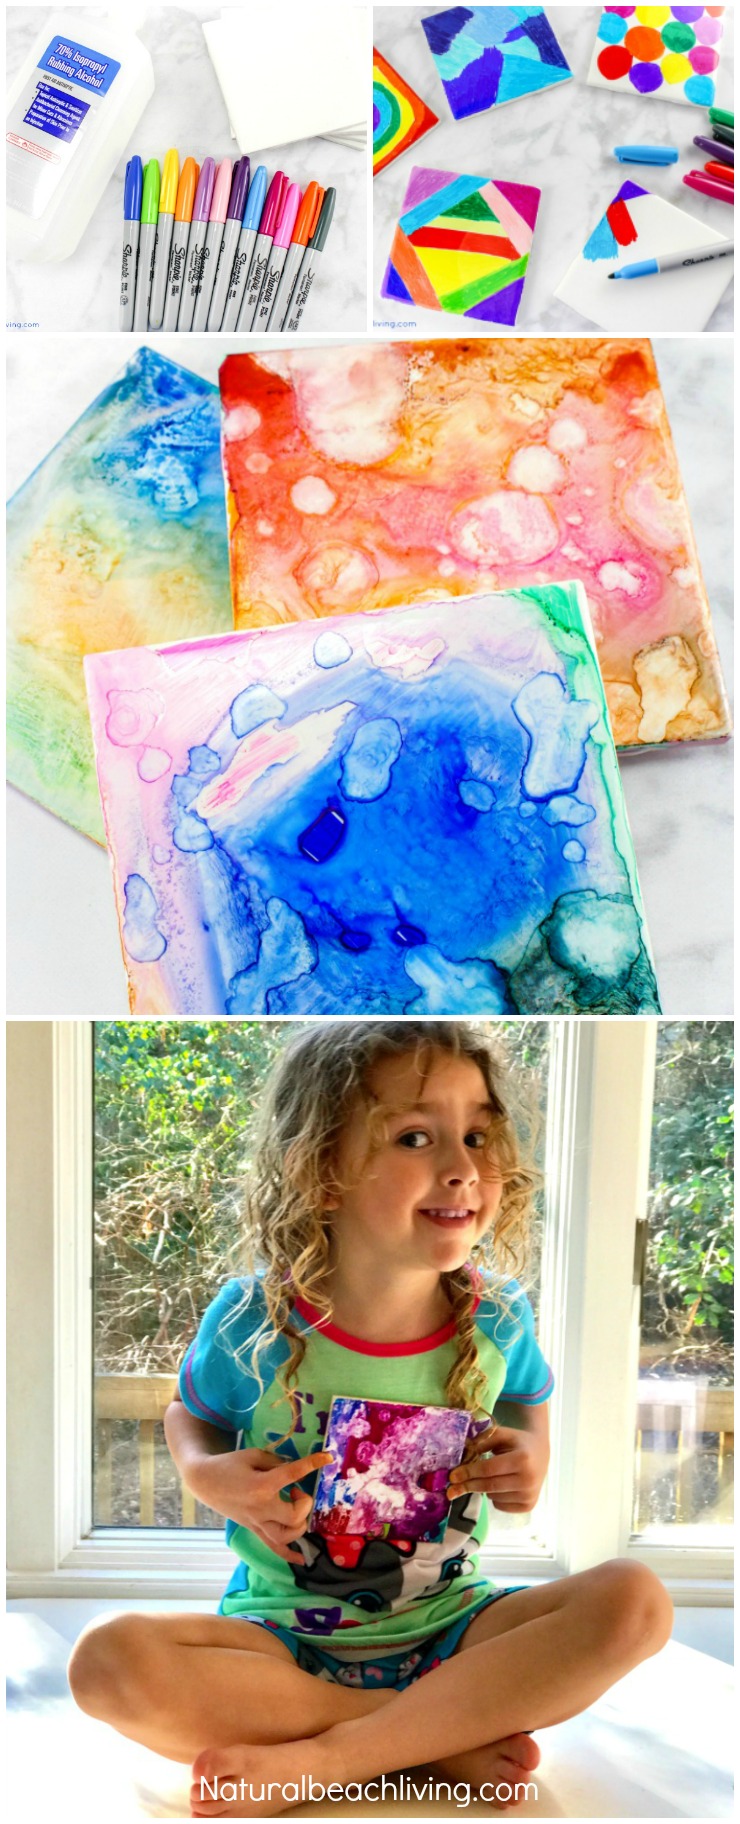 Check out This AMAZING Tile Art for Kids, See how Easy it is to make Tile Art Crafts That Everyone Will Enjoy, Easy Sharpie Art for Kids is the coolest, perfect Tile Crafts for kids that is a Fun Process Art, Sharpie Crafts, and Kid made gift idea, Click here for more Tie Dye arts and crafts ideas, and Crafts for kids